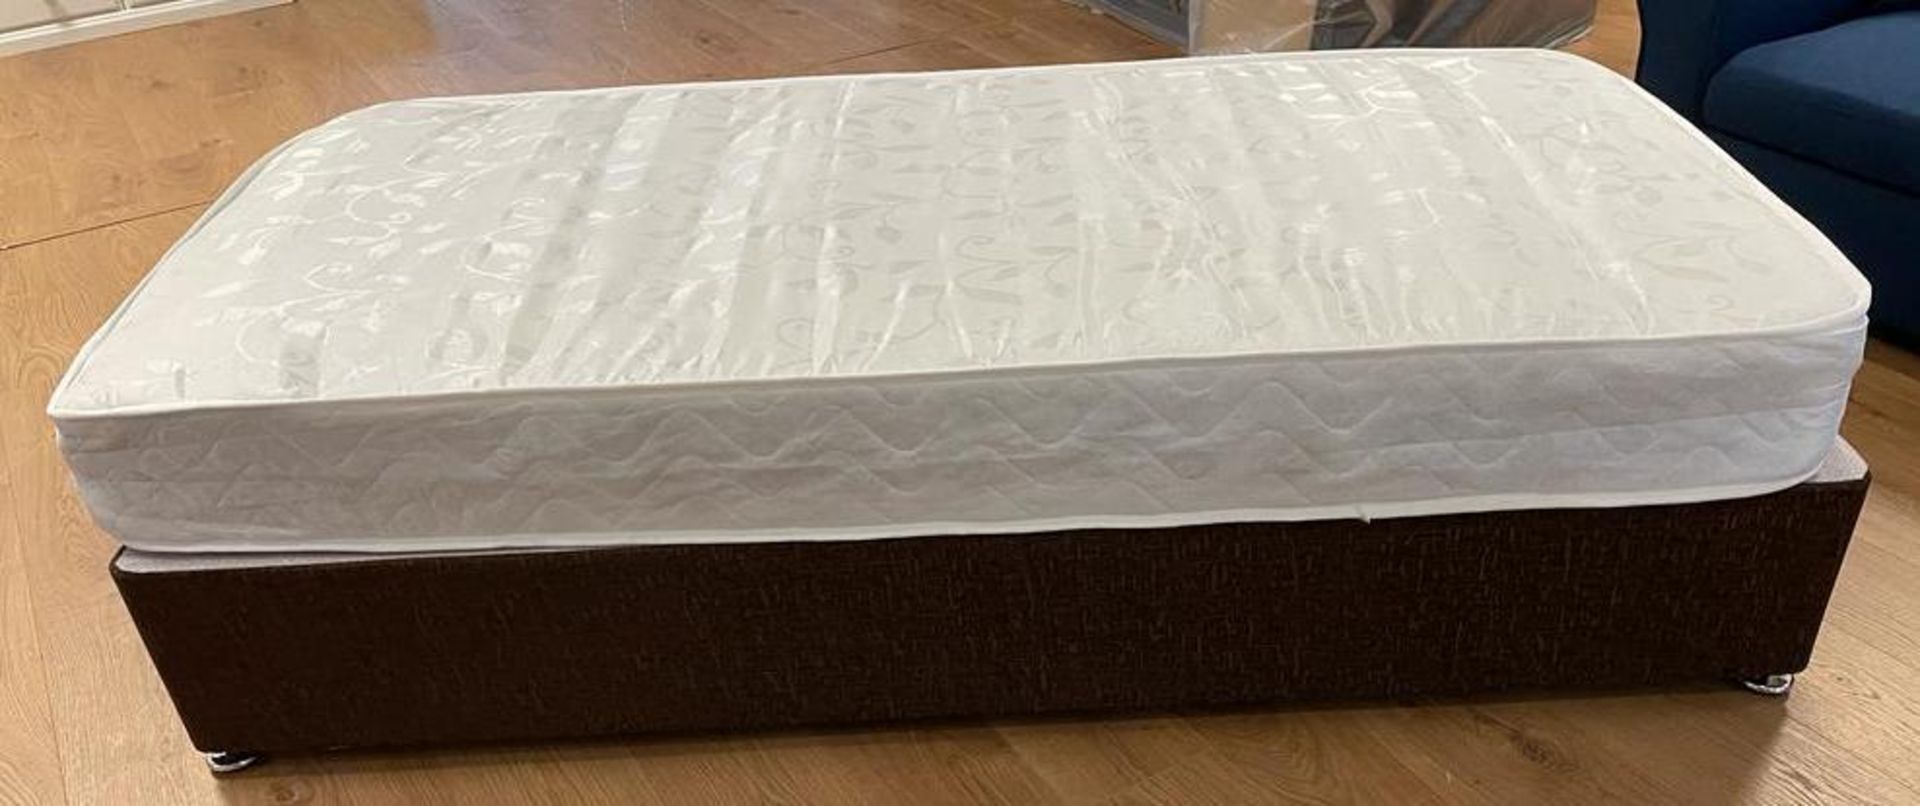 Brand New 4'6ft bed base in a light brown chenille with 800 pocket sprung Mattress.